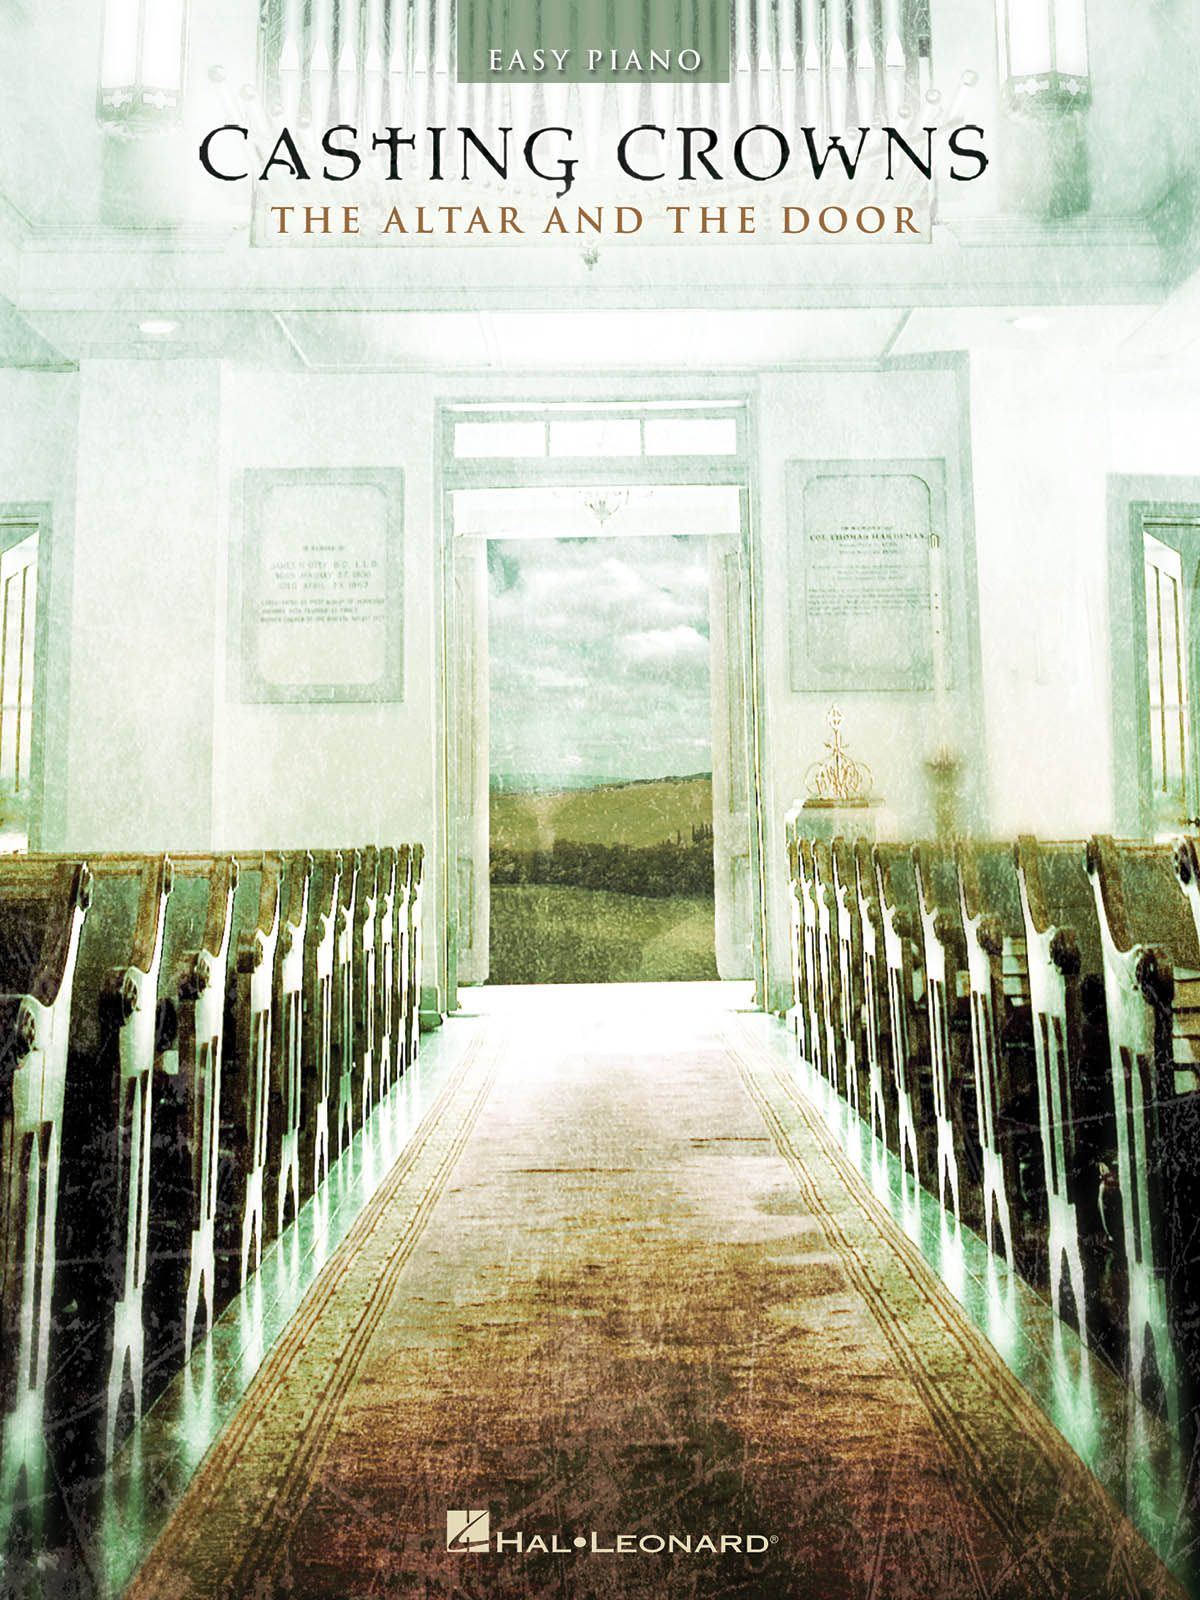 Casting Crowns: Casting Crowns - The Altar and the Door: Easy Piano: